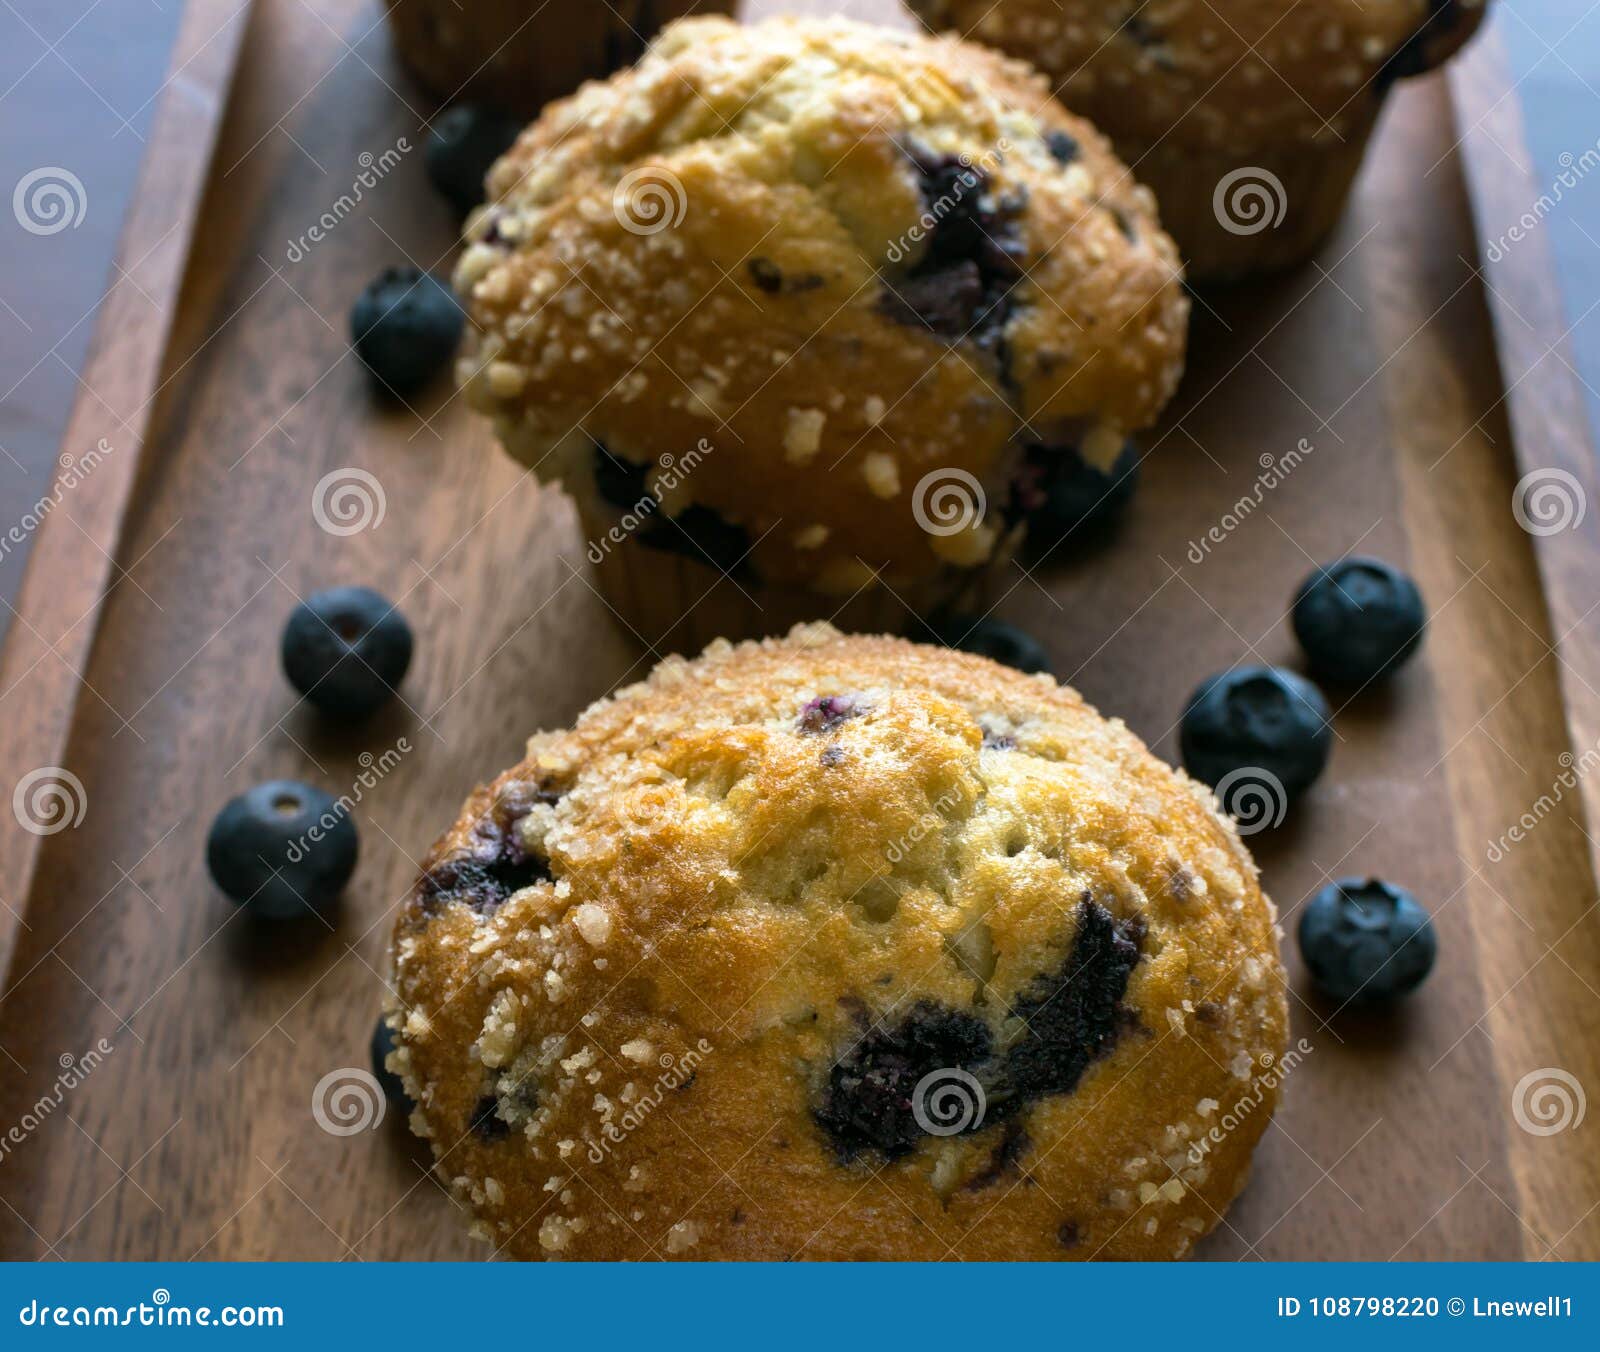 Blueberry Muffins with Fresh Fruit on Wooden Tray Stock Photo - Image ...